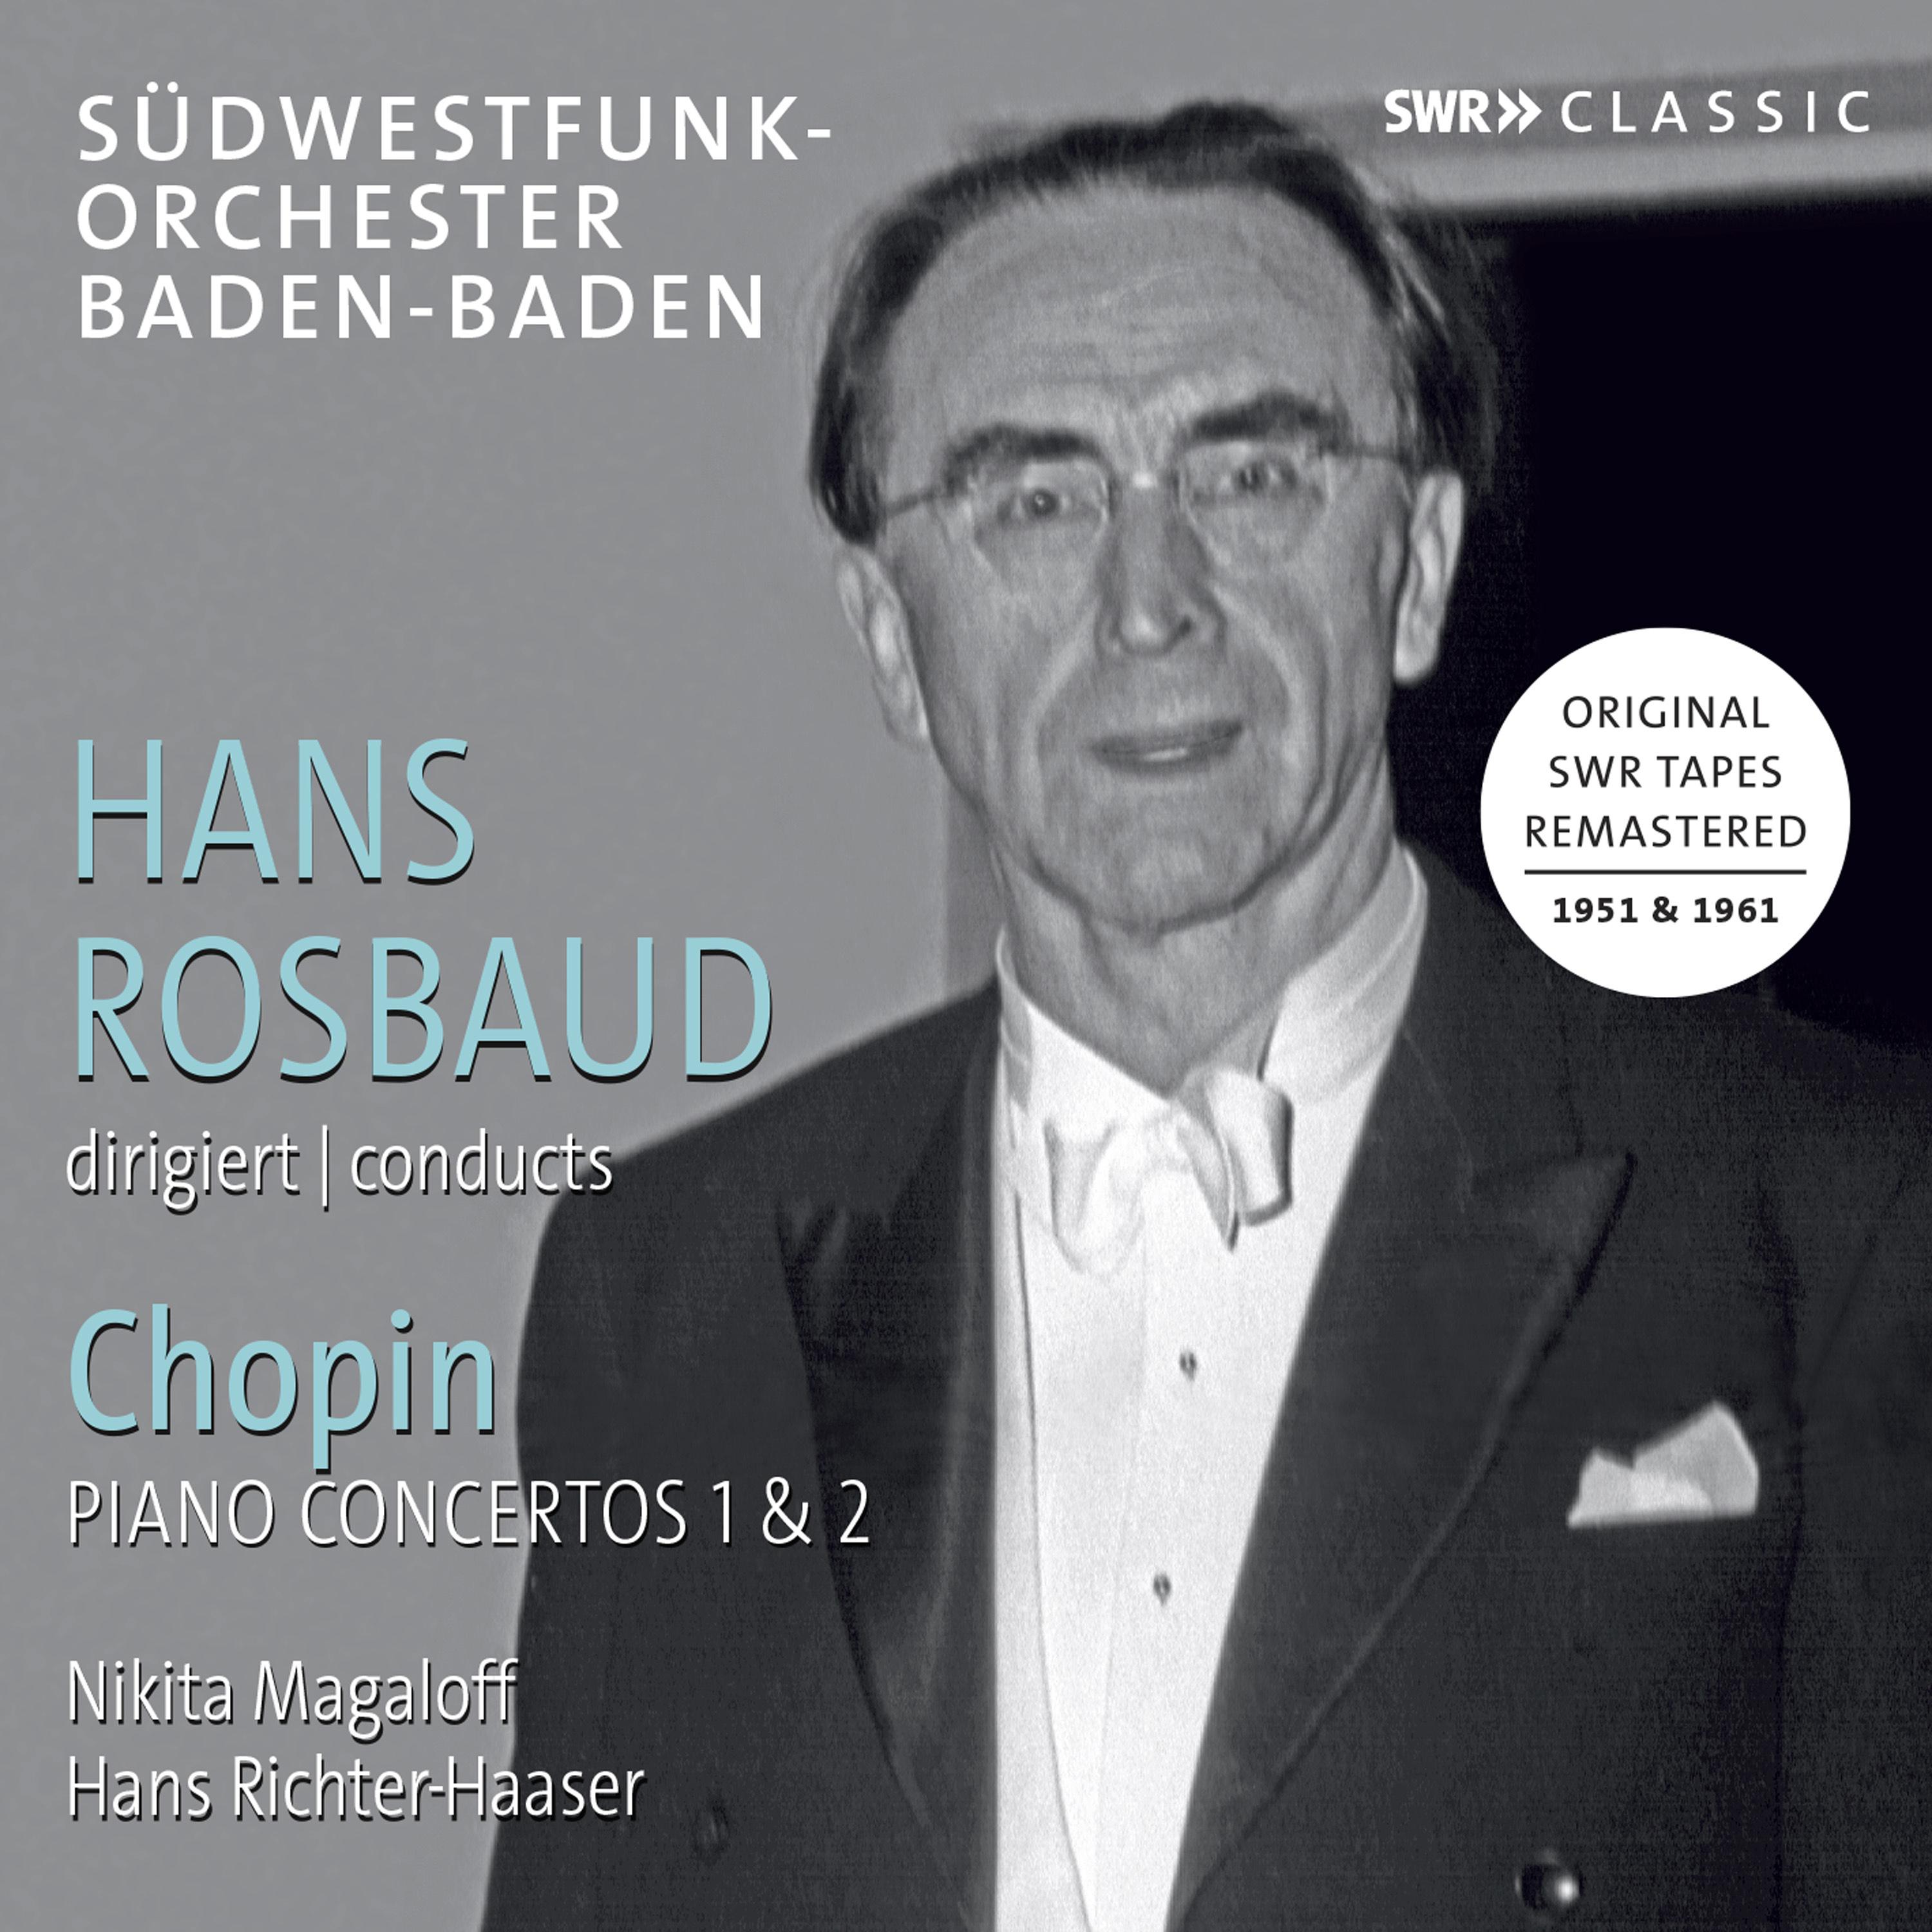 CHOPIN, F.: Piano Concertos Nos. 1 and 2 (Magaloff, Richter-Haaser, South West German Radio Symphony Orchestra, Baden-Baden, Rosbaud) (1951 and 1961)